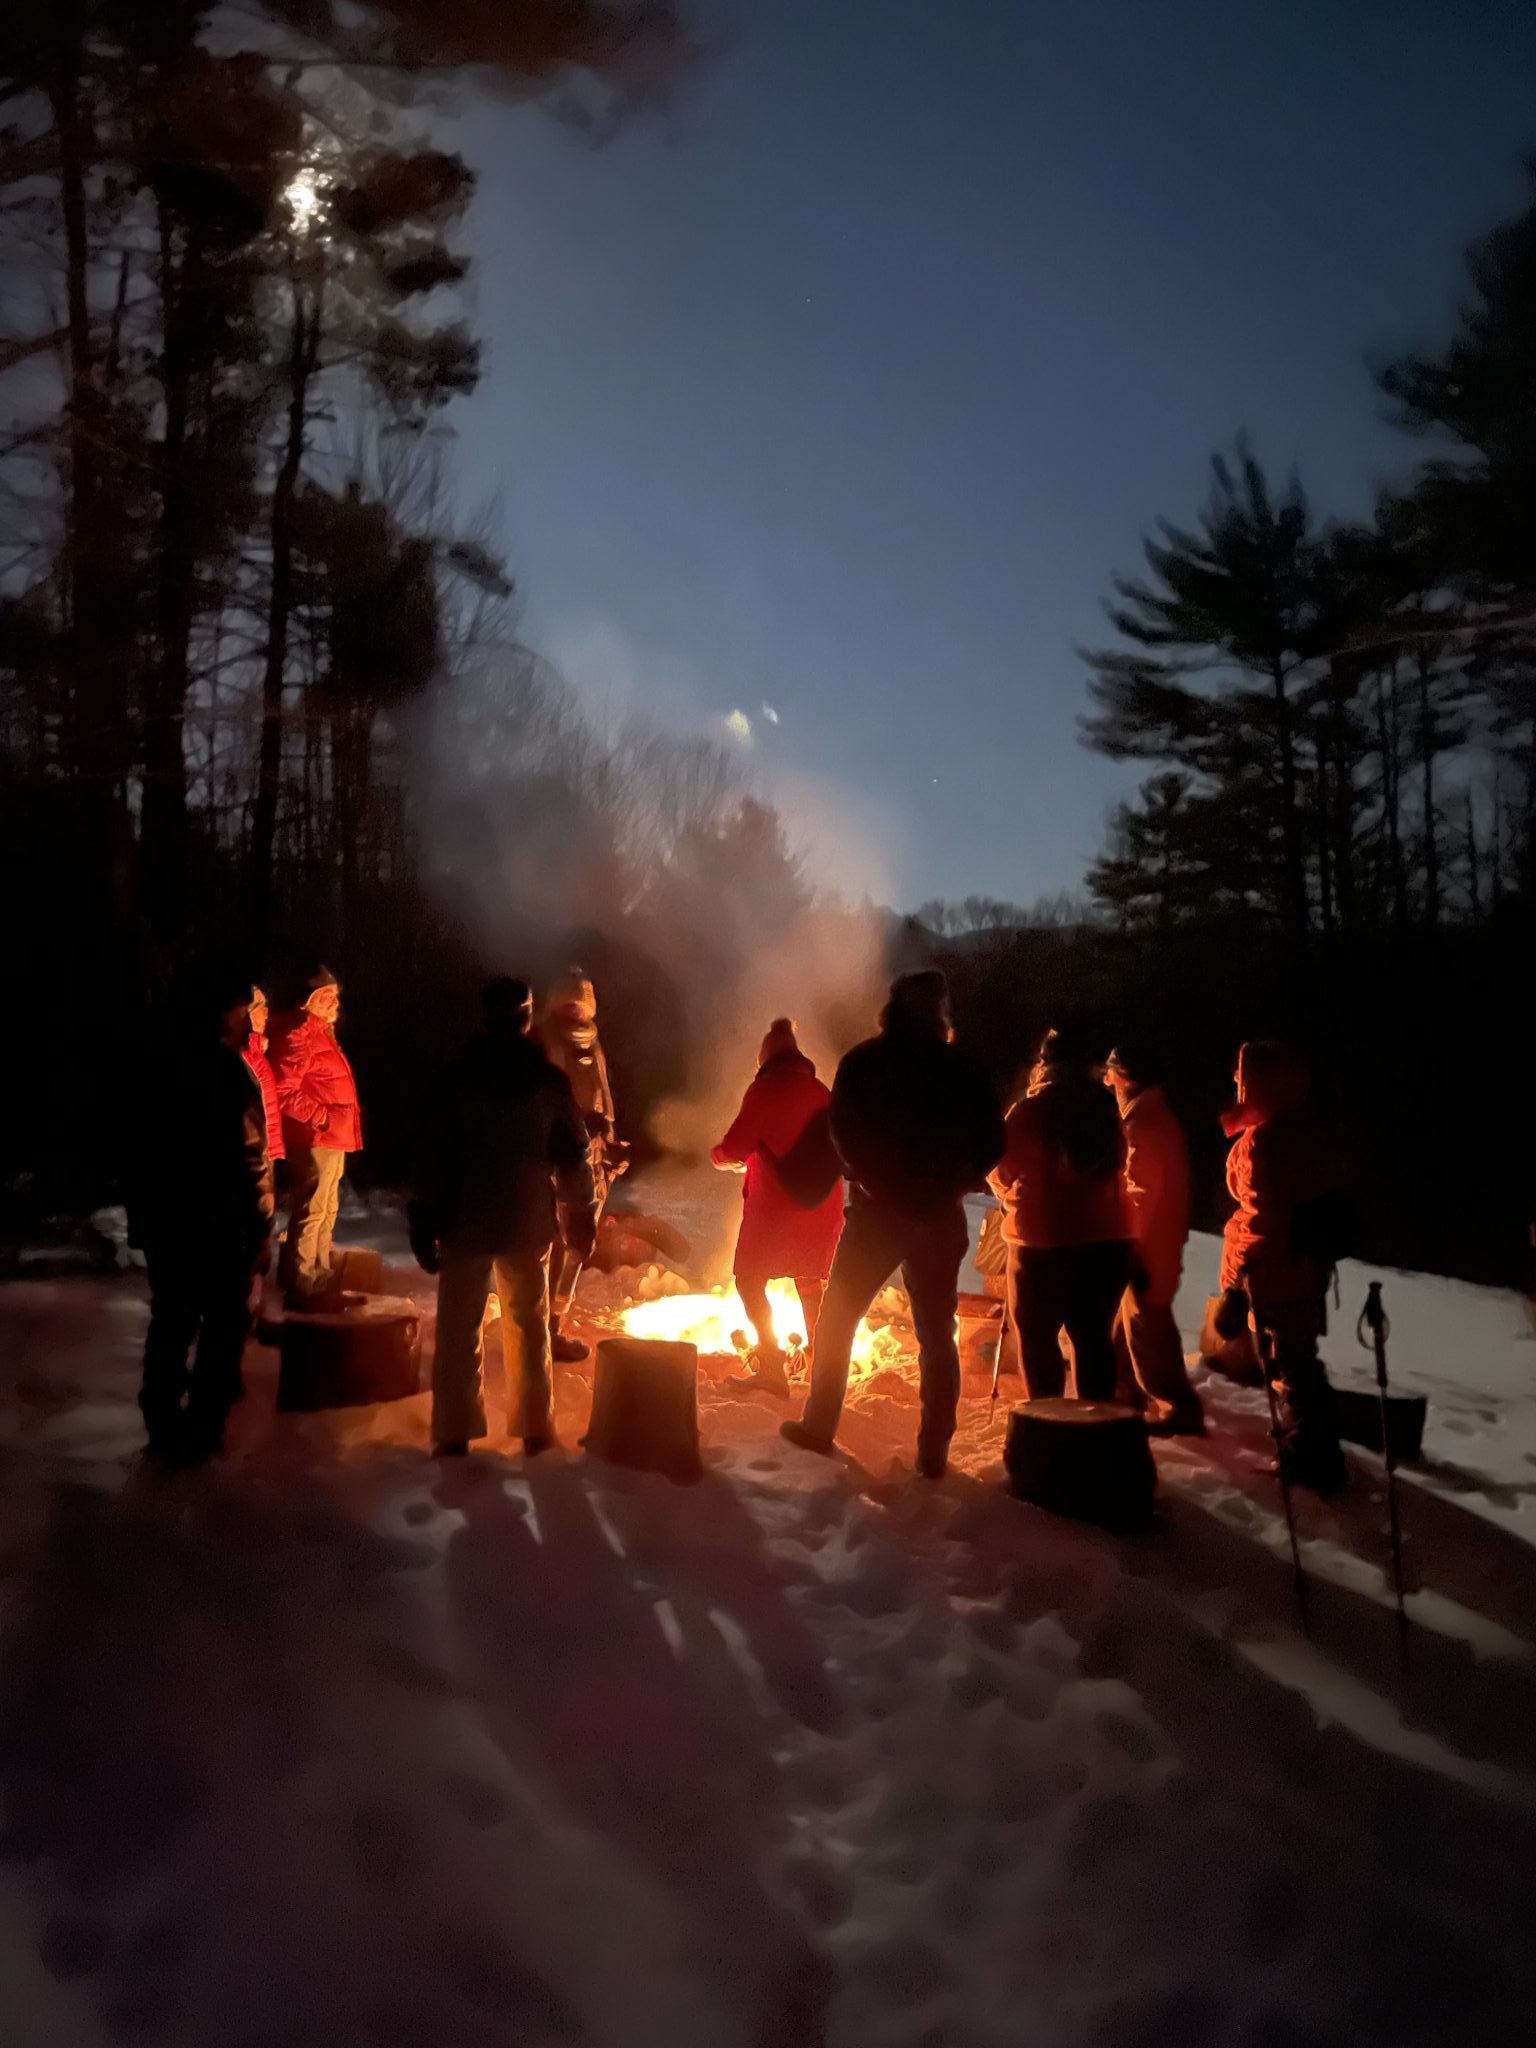 People surround an outdoor fire on a snowy full moon night